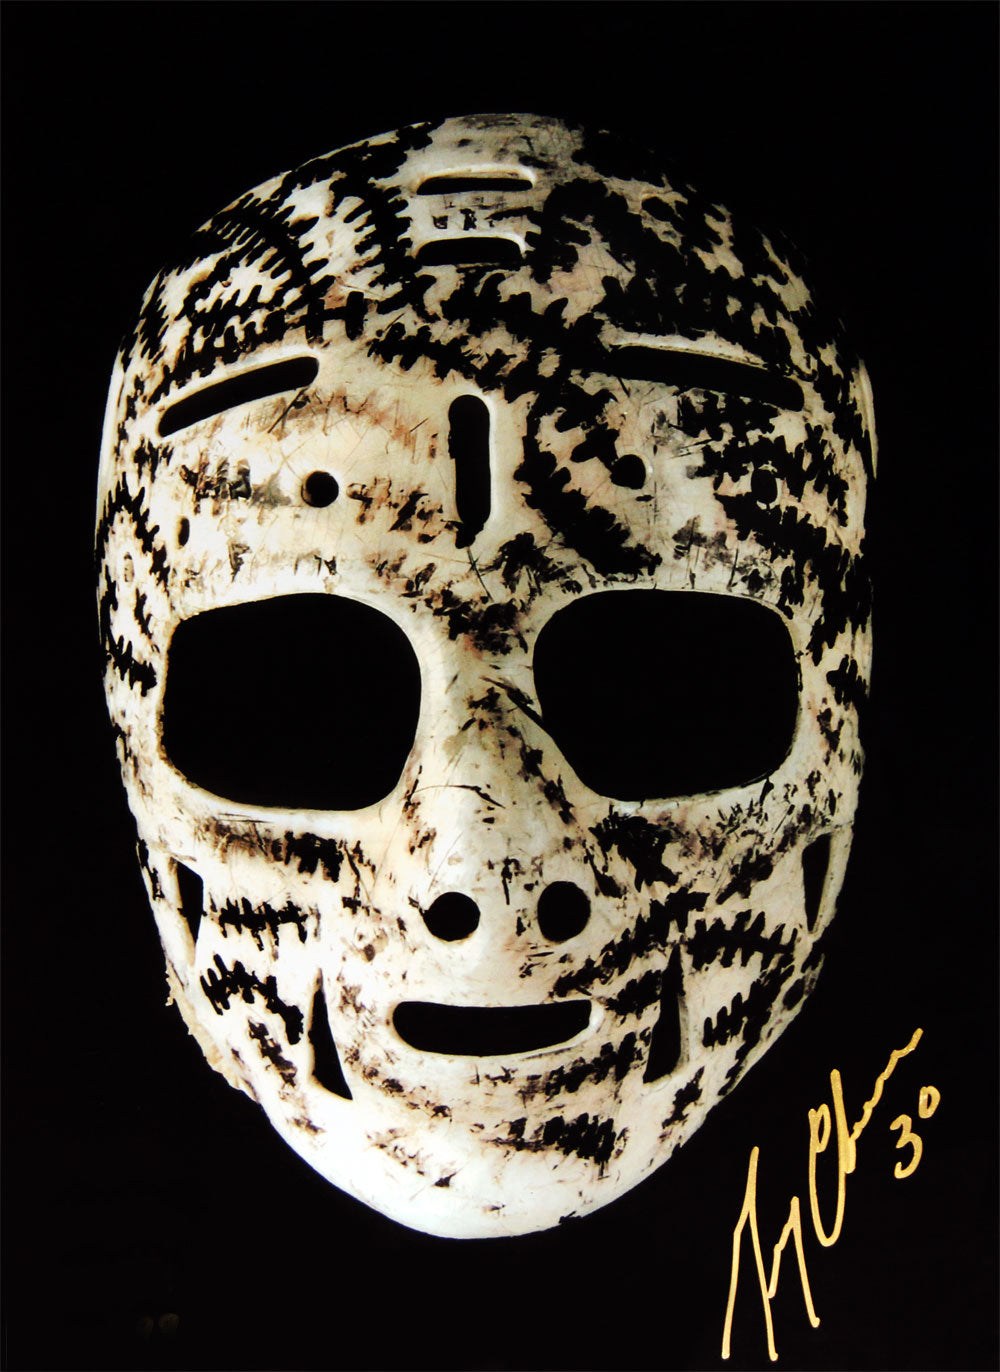 Gerry Cheevers The Mask Signed 10X15 - Boston Bruins, Boston Bruins, NHL, Hockey, Autographed, Signed, AAHPH31211